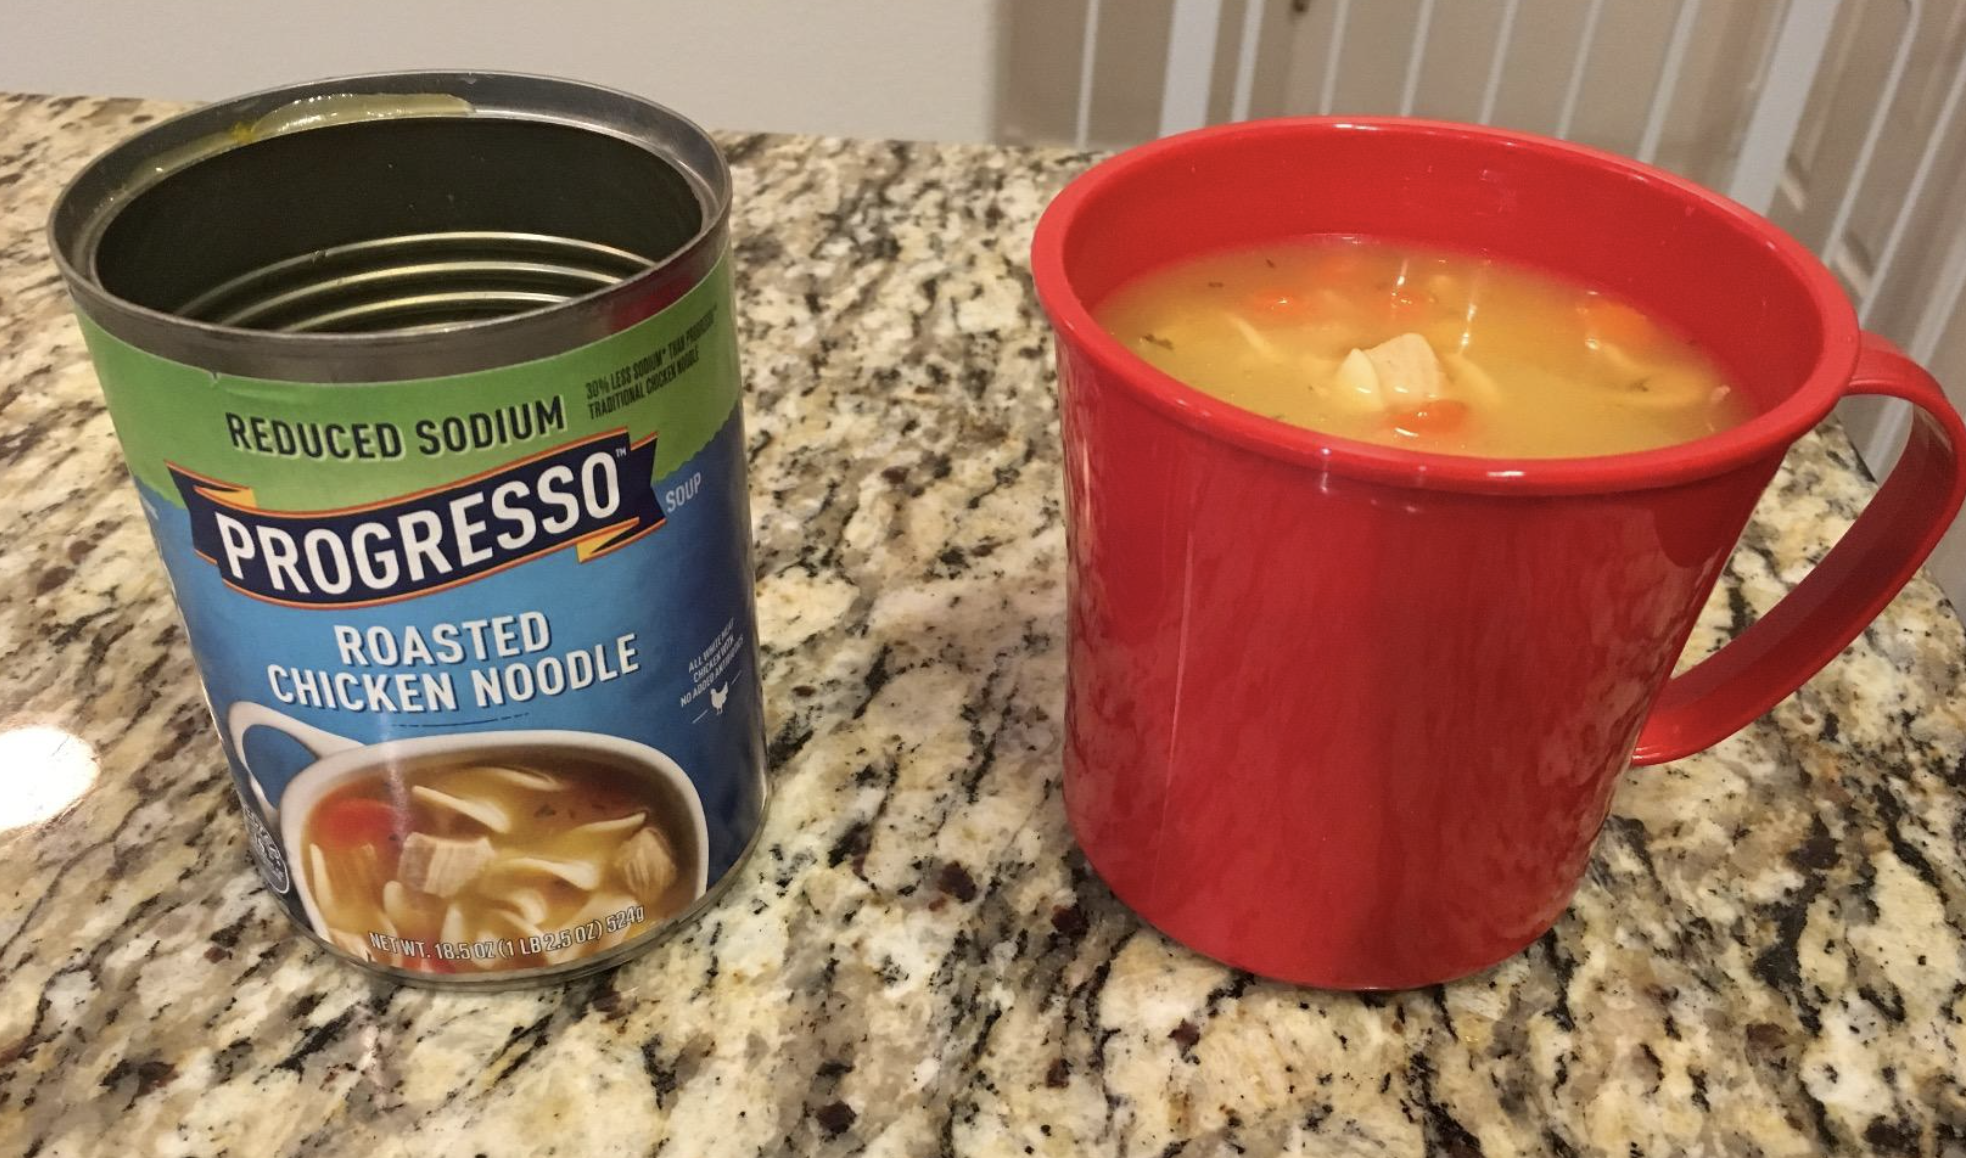 reviewer photo of the mug filled with soup next to the empty can of soup